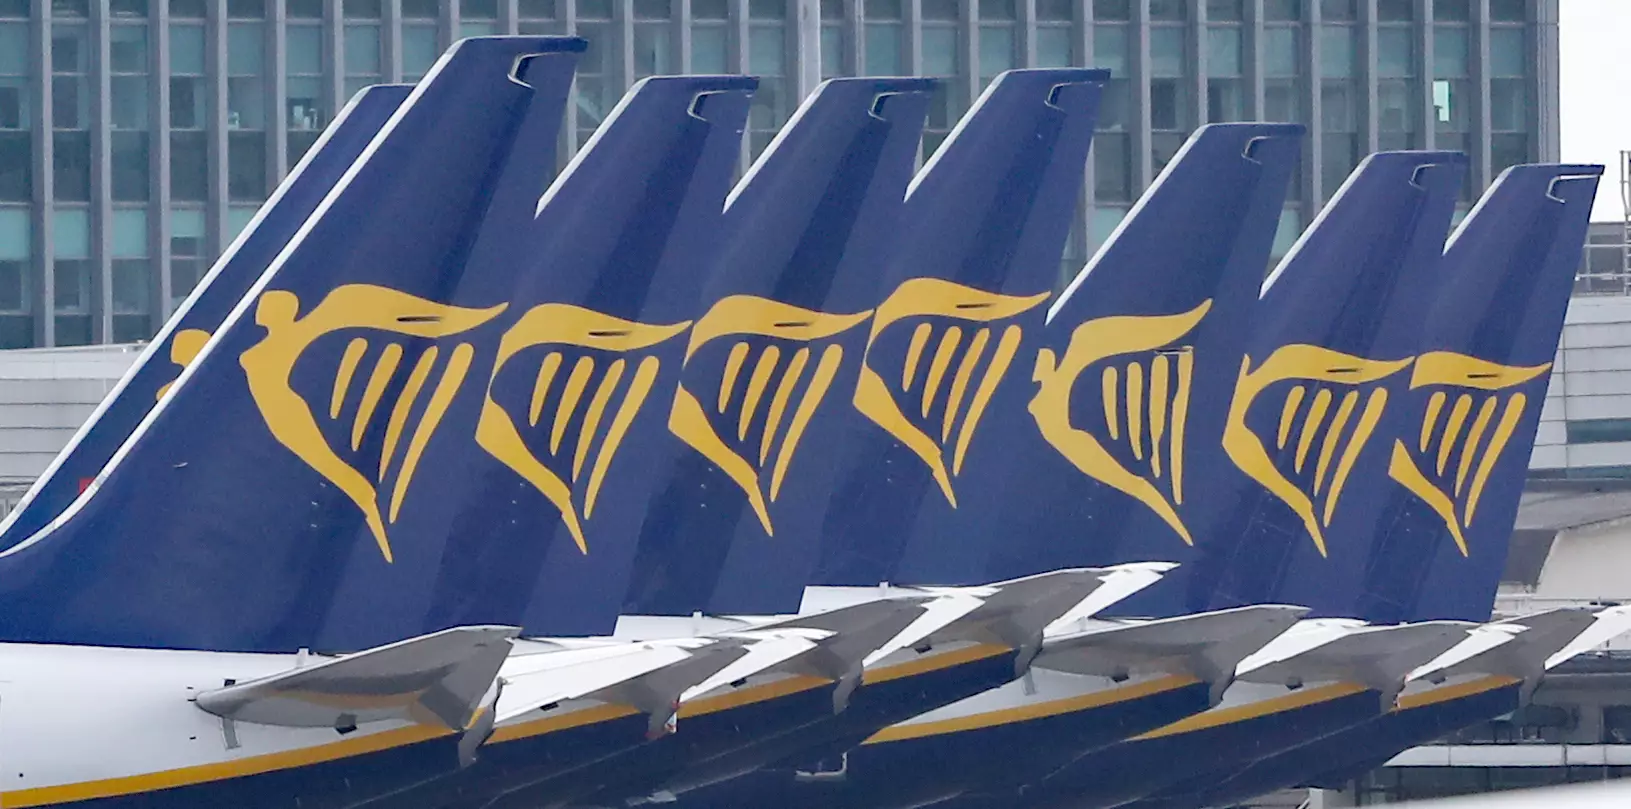 Ryanair are one of the airlines approached by Which?